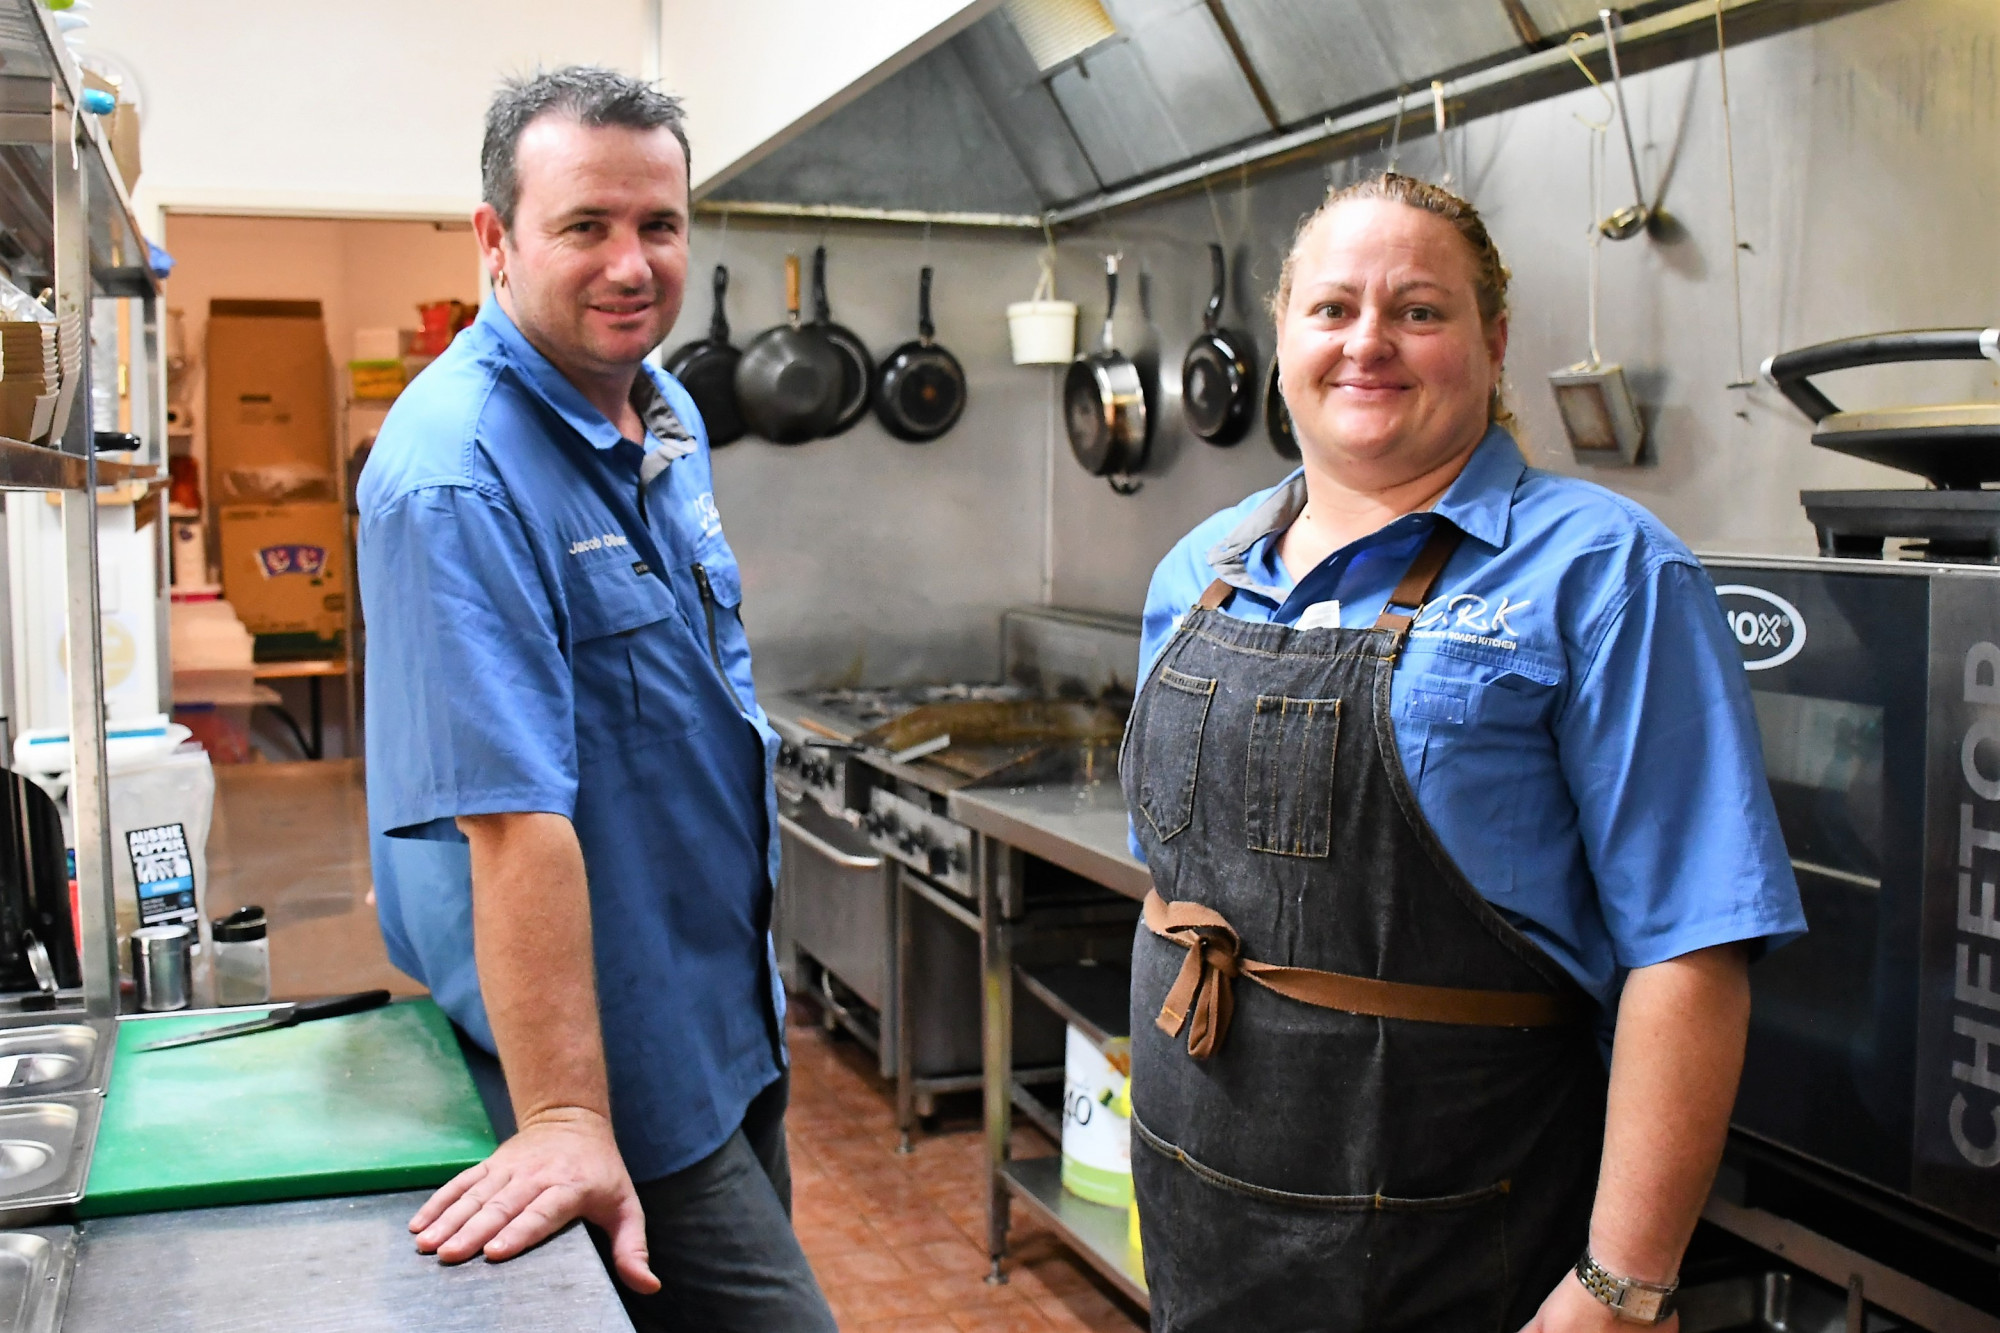 Jacob and Michelle Oliver inside the kitchen at the Malanda RSL